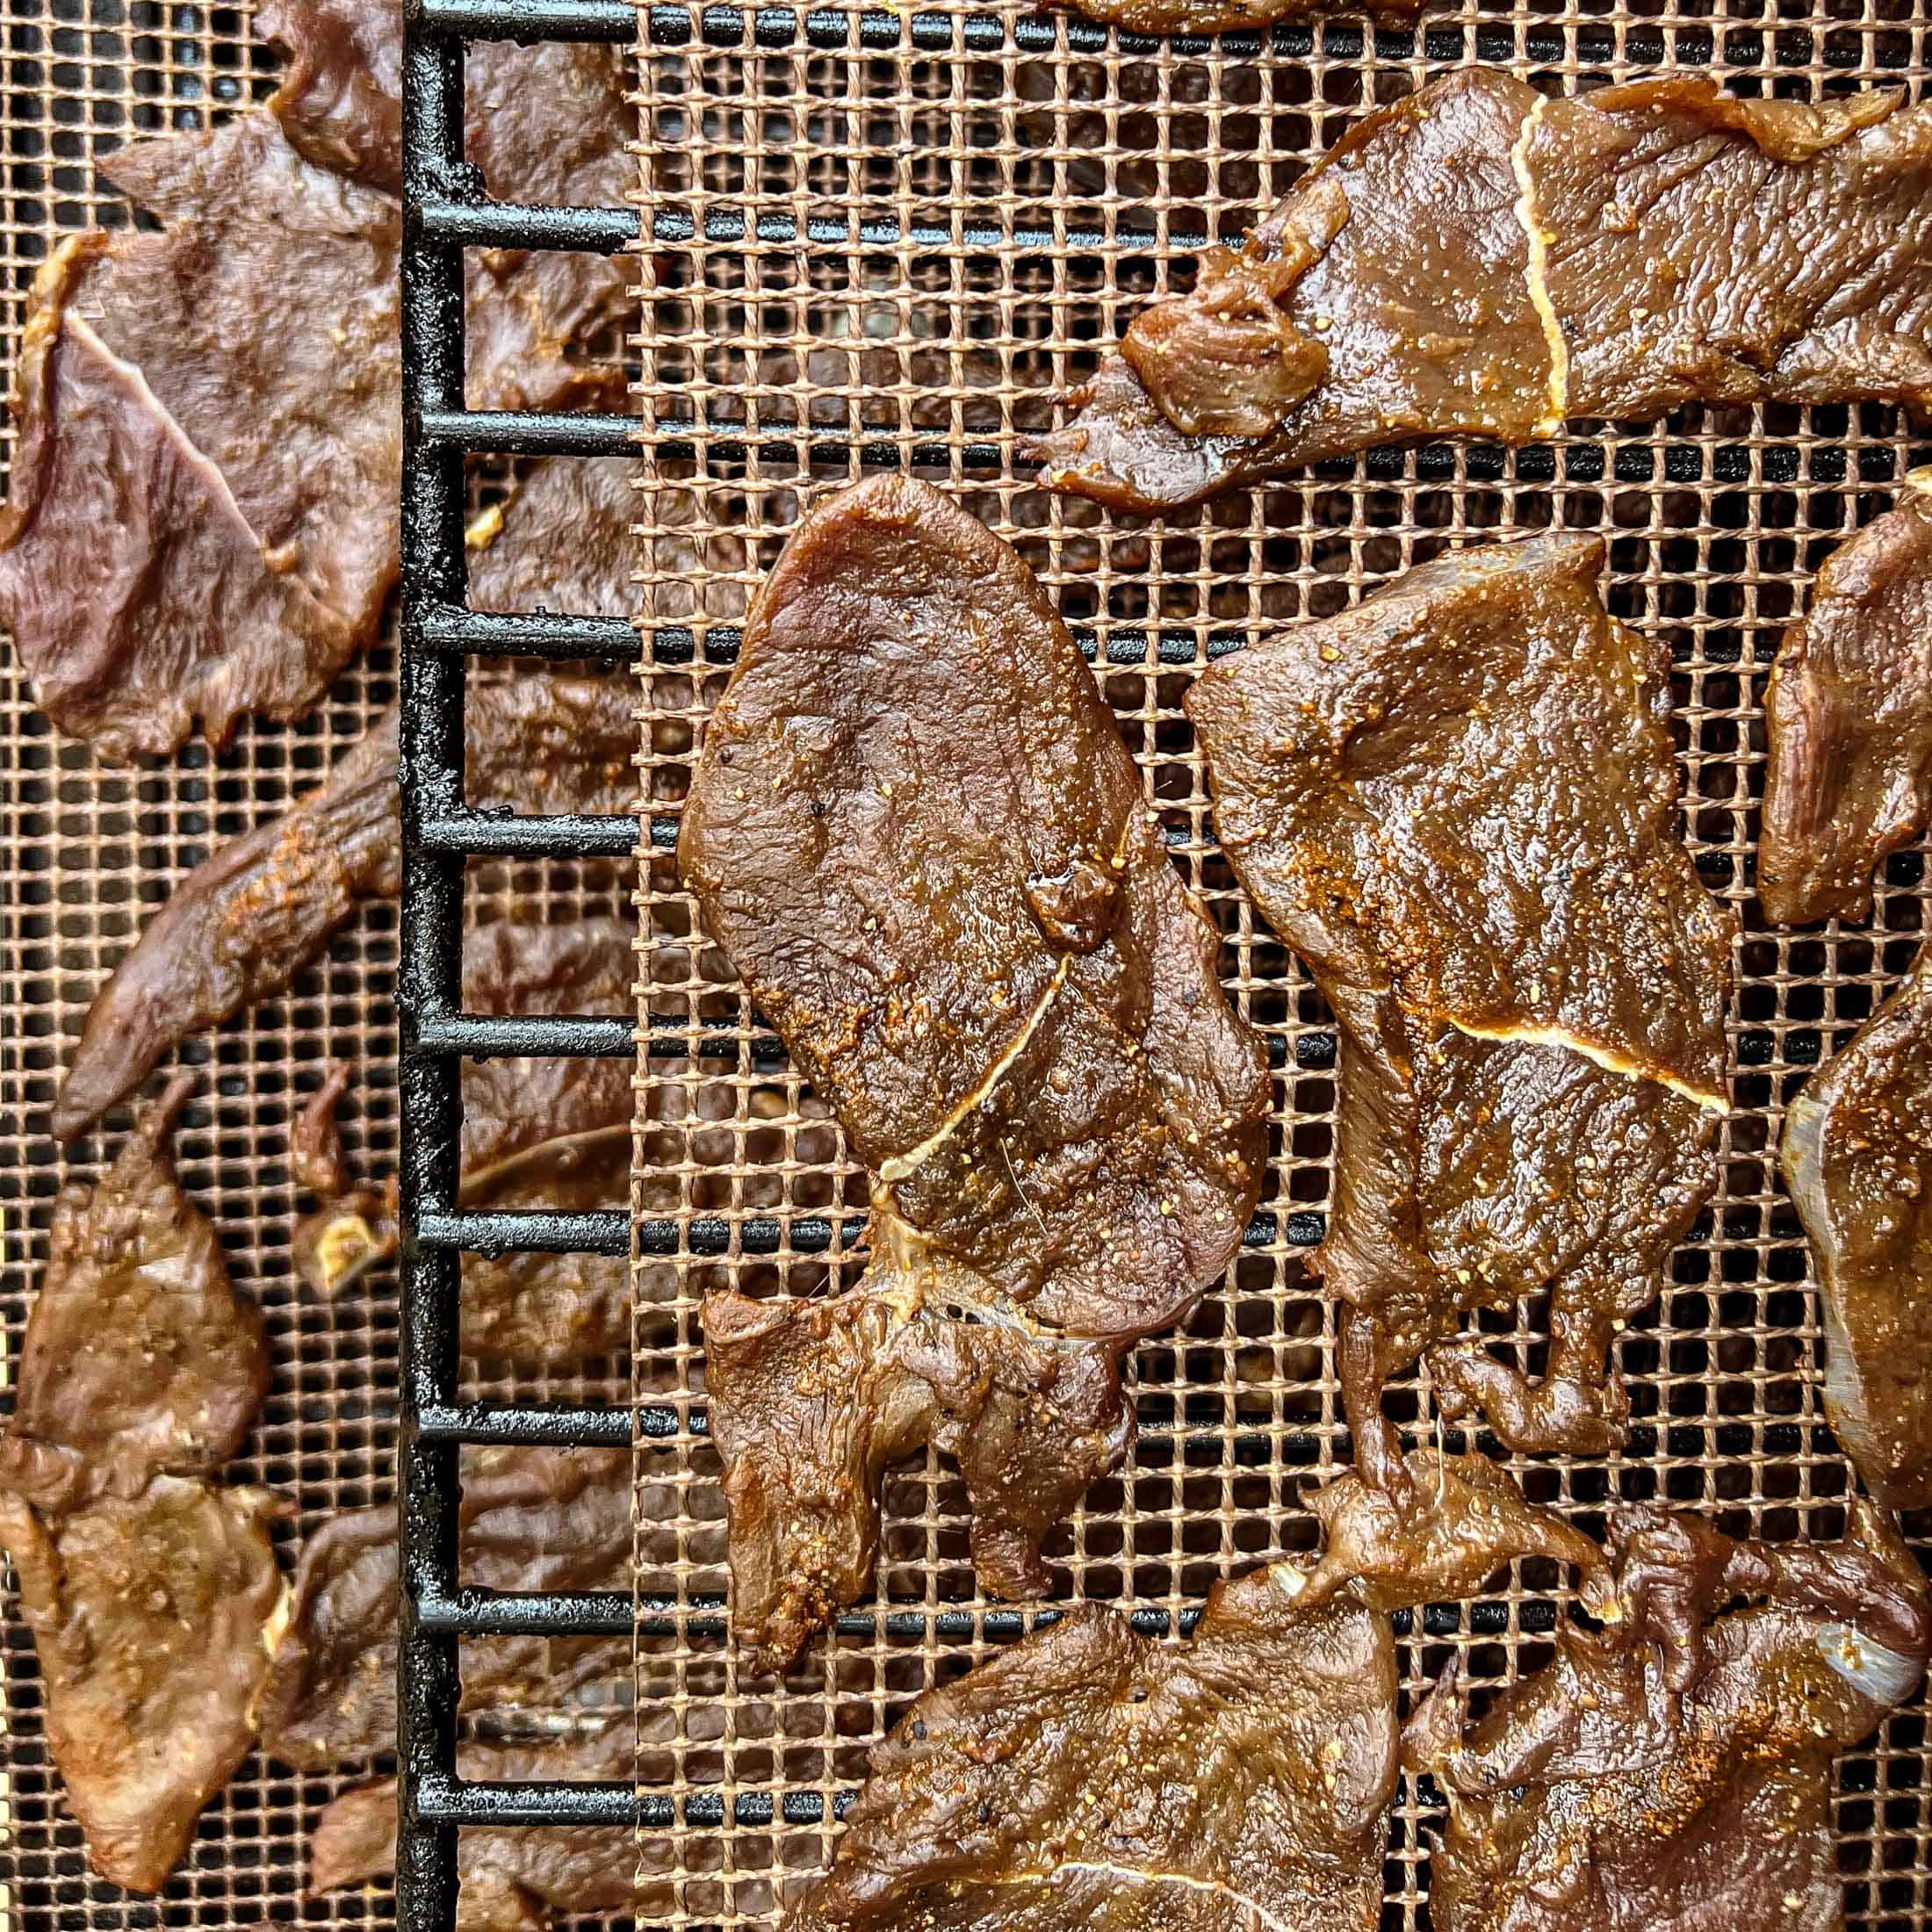 An overhead view of raw venison jerky on the smoker.